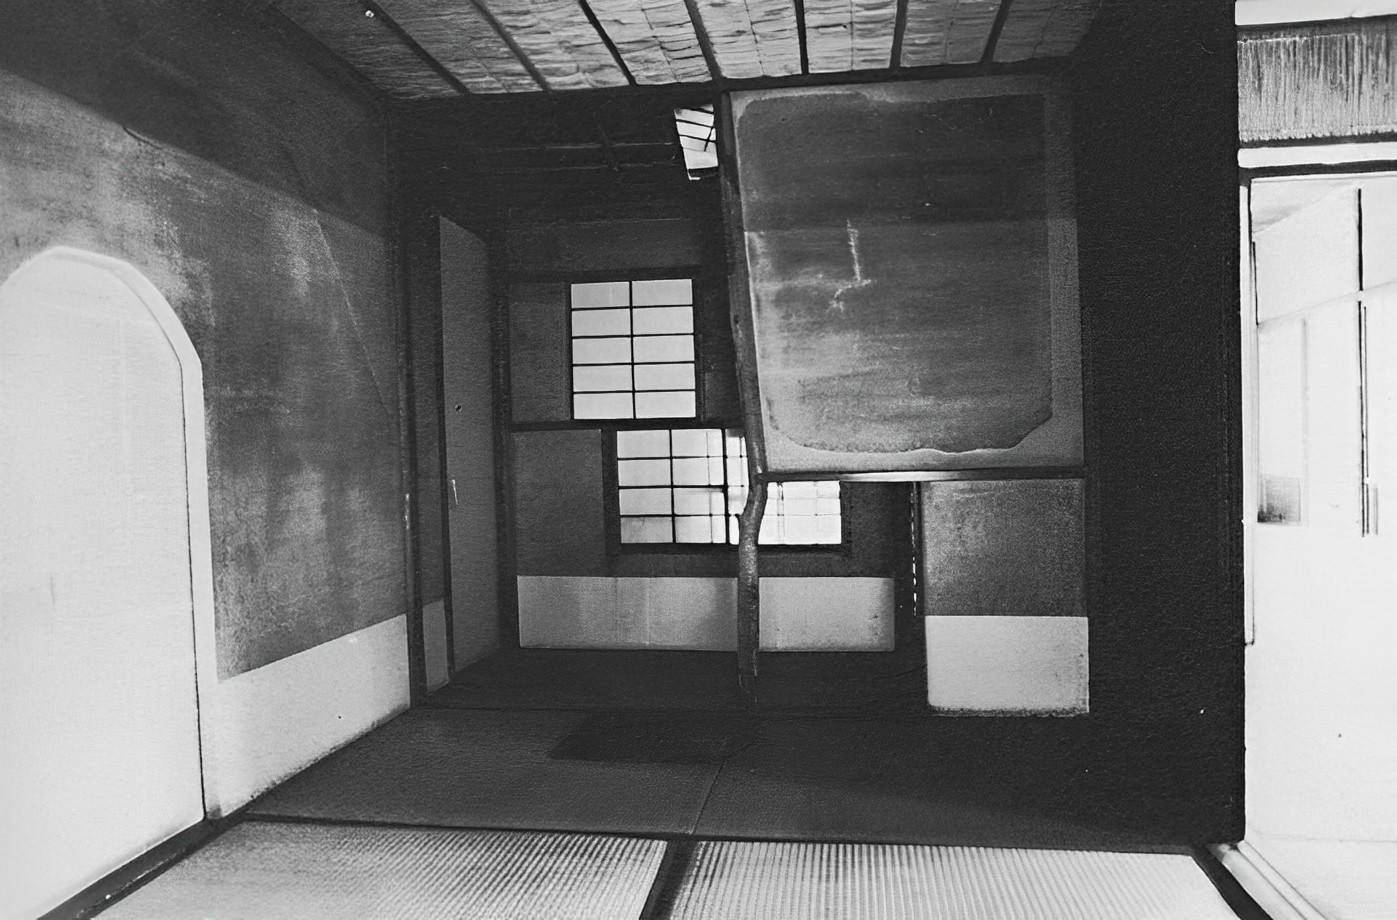 (8) Tea room at Katsura (Shokintei) shows the careful asymmetry of all elements so that none repeats and thereby becomes monotonous. The centre post has been selected for its natural bends to contrast with the eight different windows. A work must be unfinished or imperfect in some ways to allow the viewer to complete it, or give him freedom of imagination.